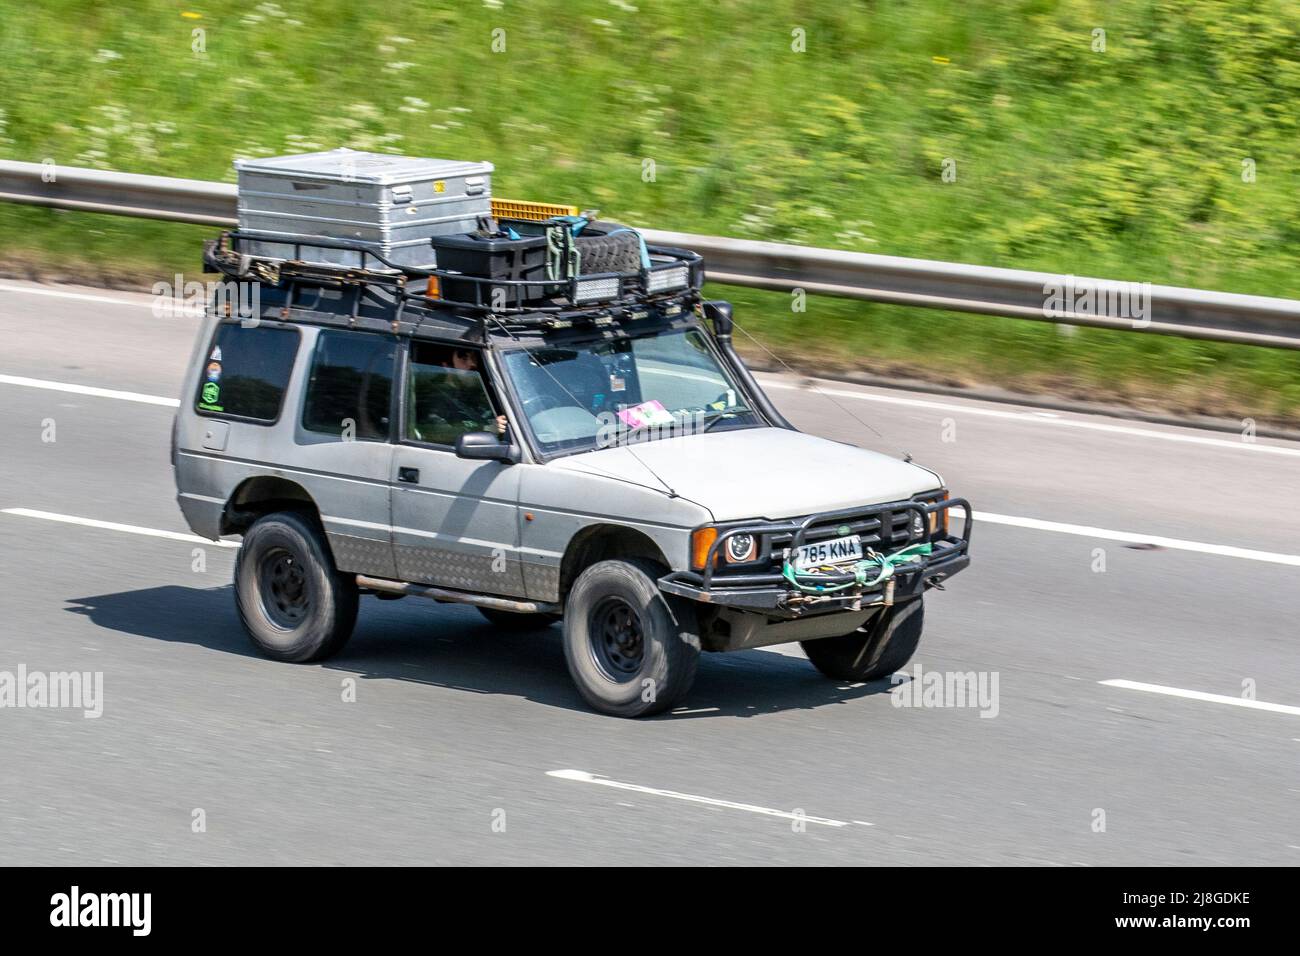 1997 90s nineties Expedition LAND ROVER DISCOVERY Tdi 2495cc Diesel Adventure SUV; driving on the M61 Motorway, Manchester, UK Stock Photo